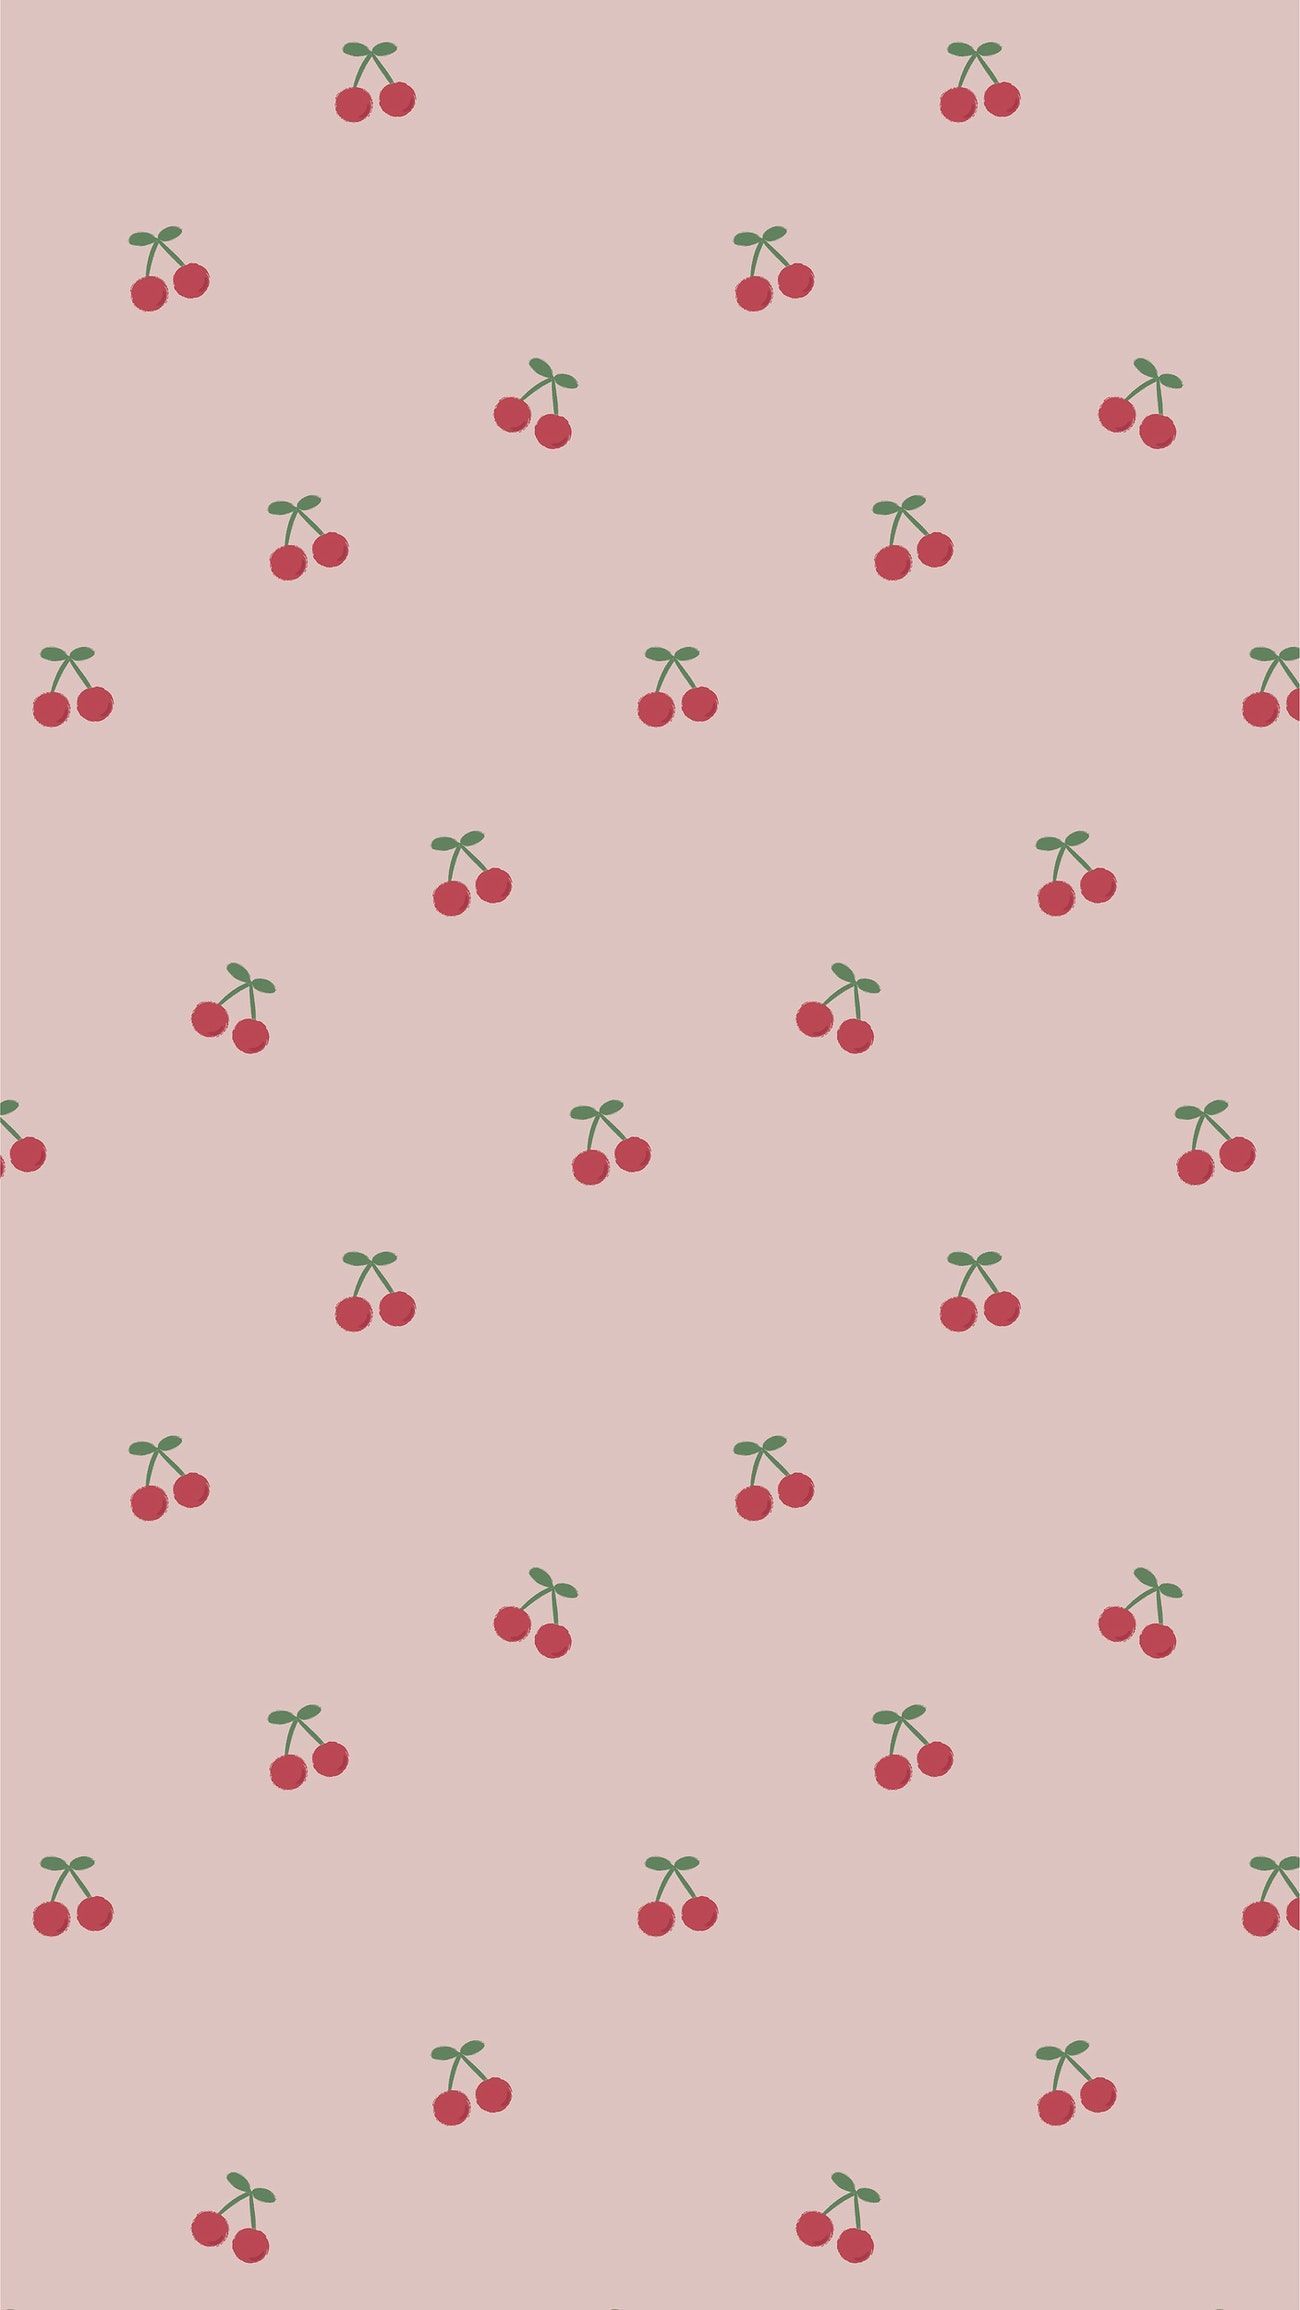 Cute Cherry Aesthetic Wallpaper Free Cute Cherry Aesthetic Background